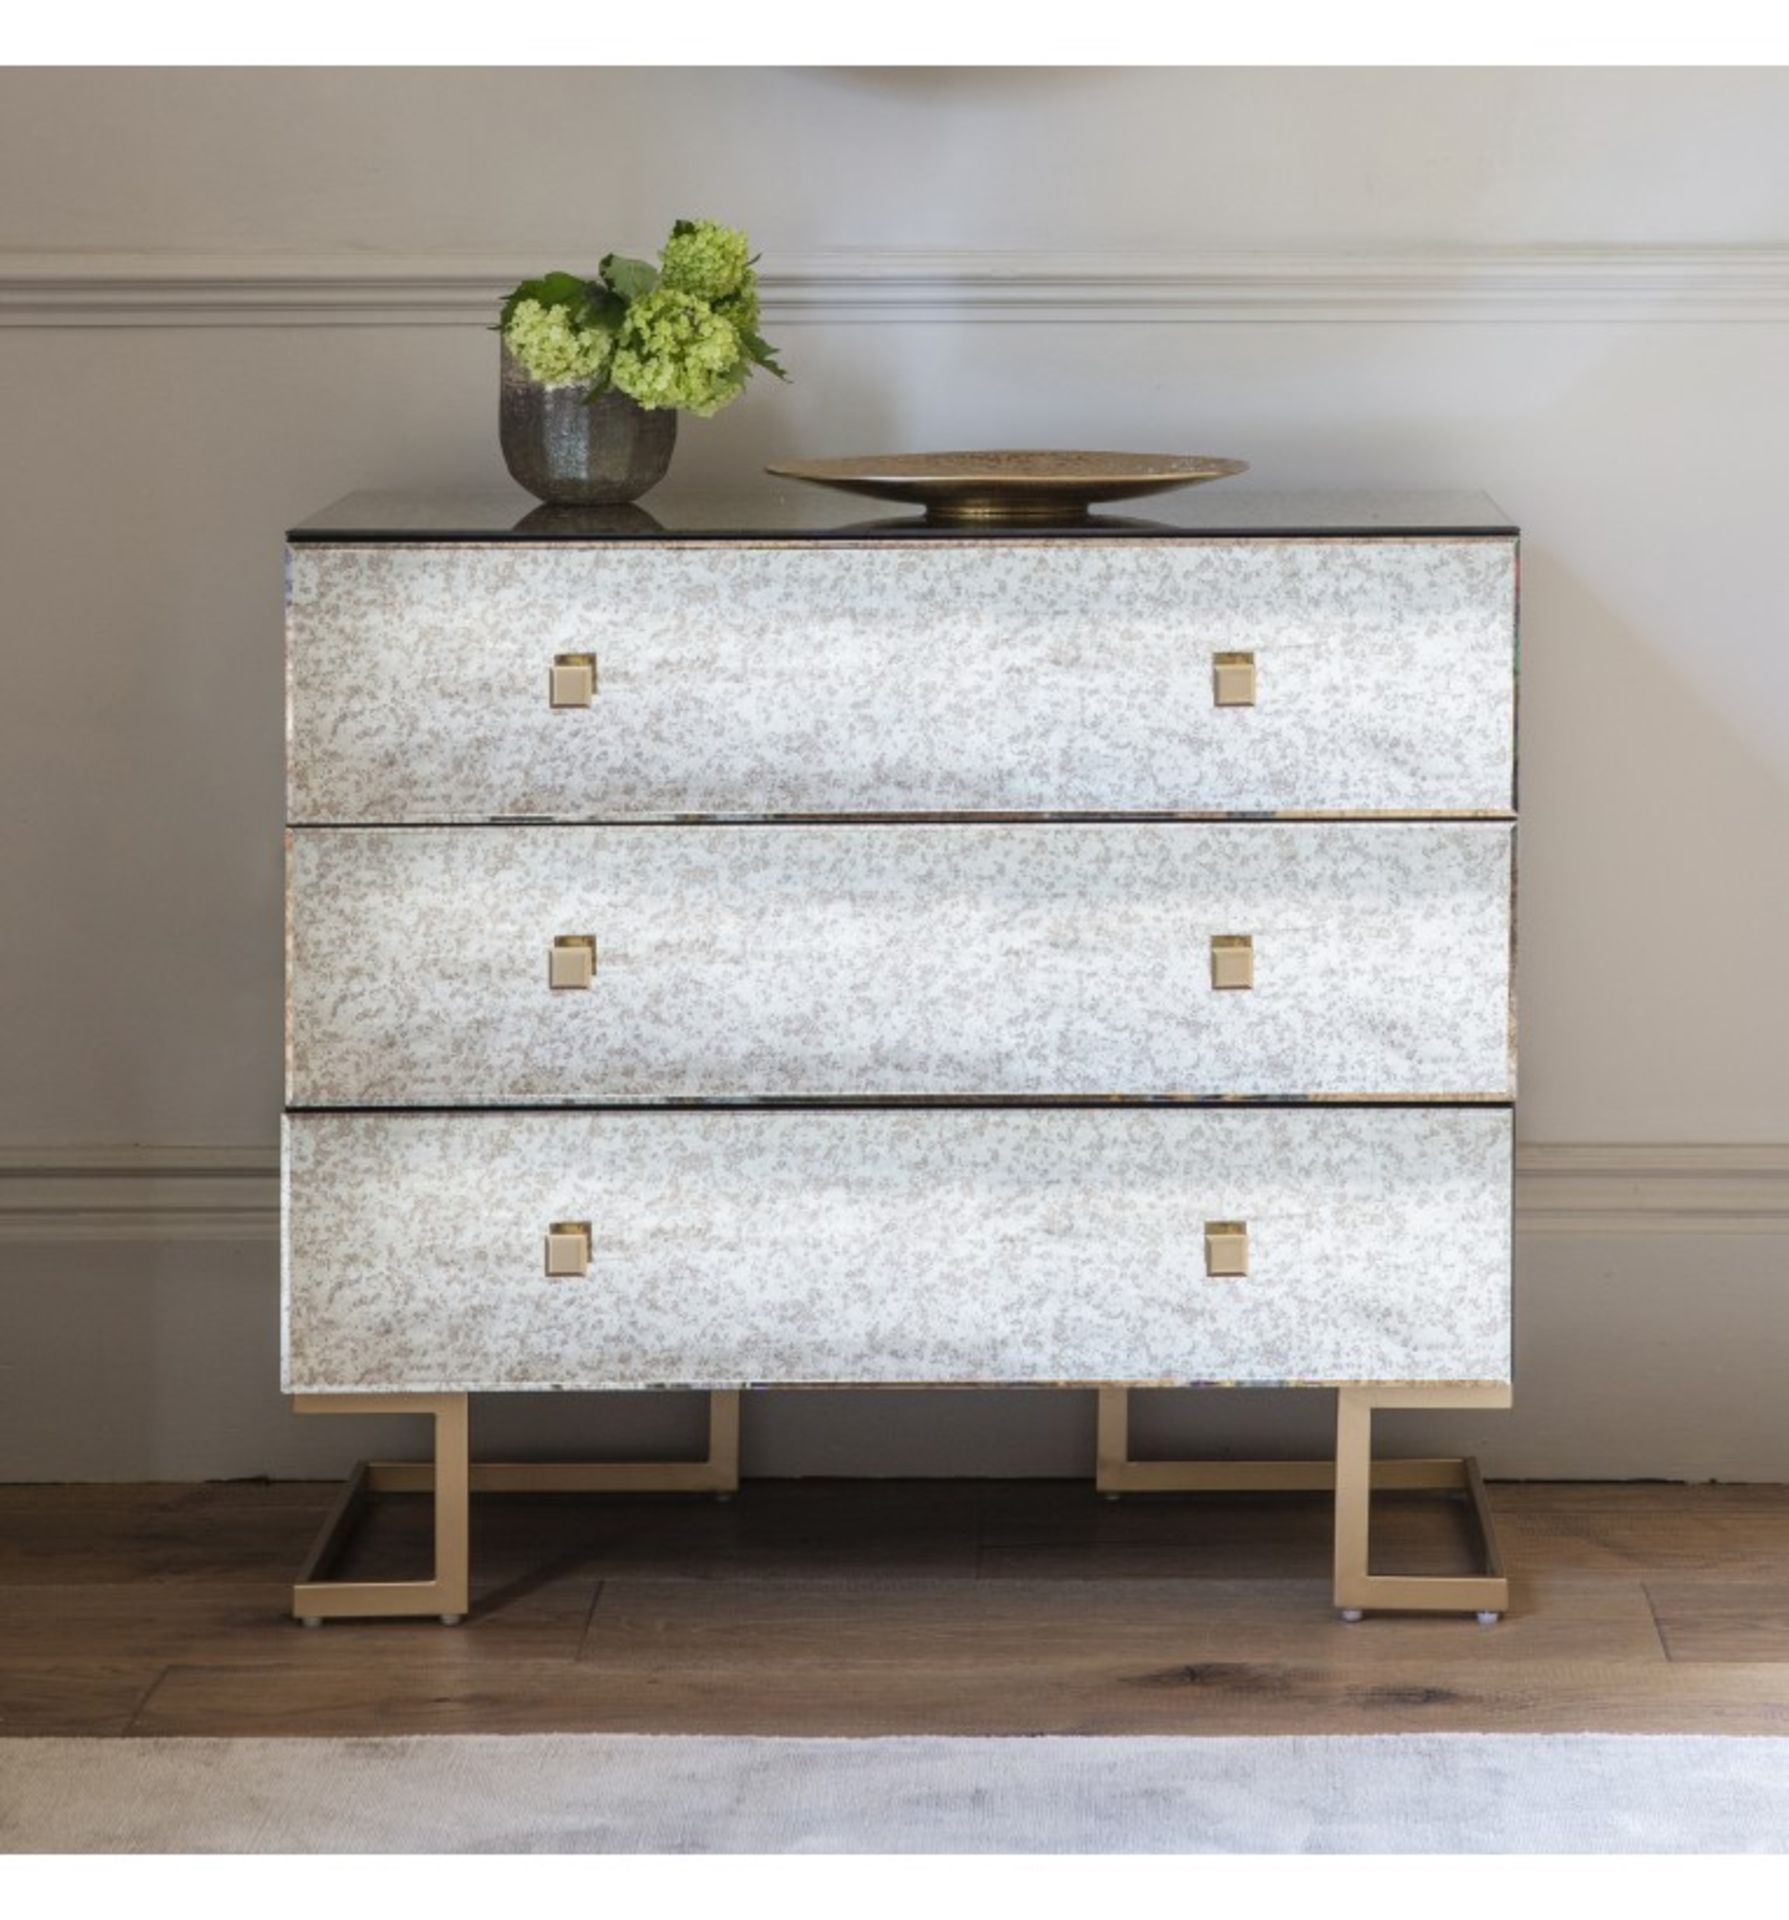 Amberley 3 Drawer Wide Chest The Amberley 3 Drawer Wide Chest is the latest addition to our range of